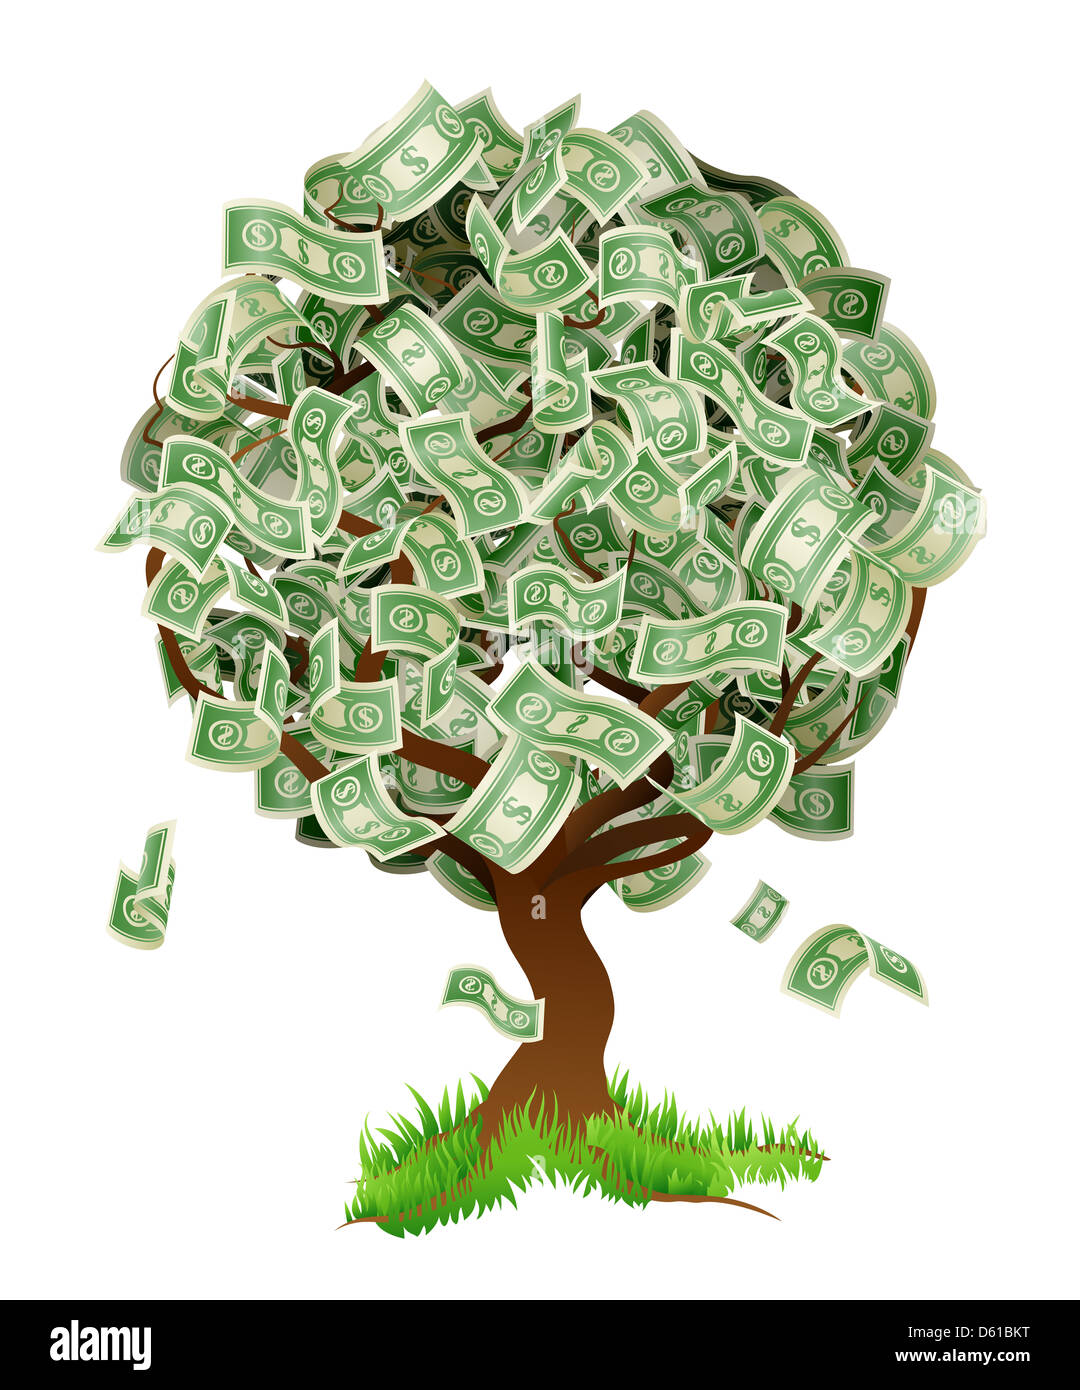 A conceptual illustration of a tree growing money dollar notes. Concept for profit or economic growth or earning interest. Stock Photo